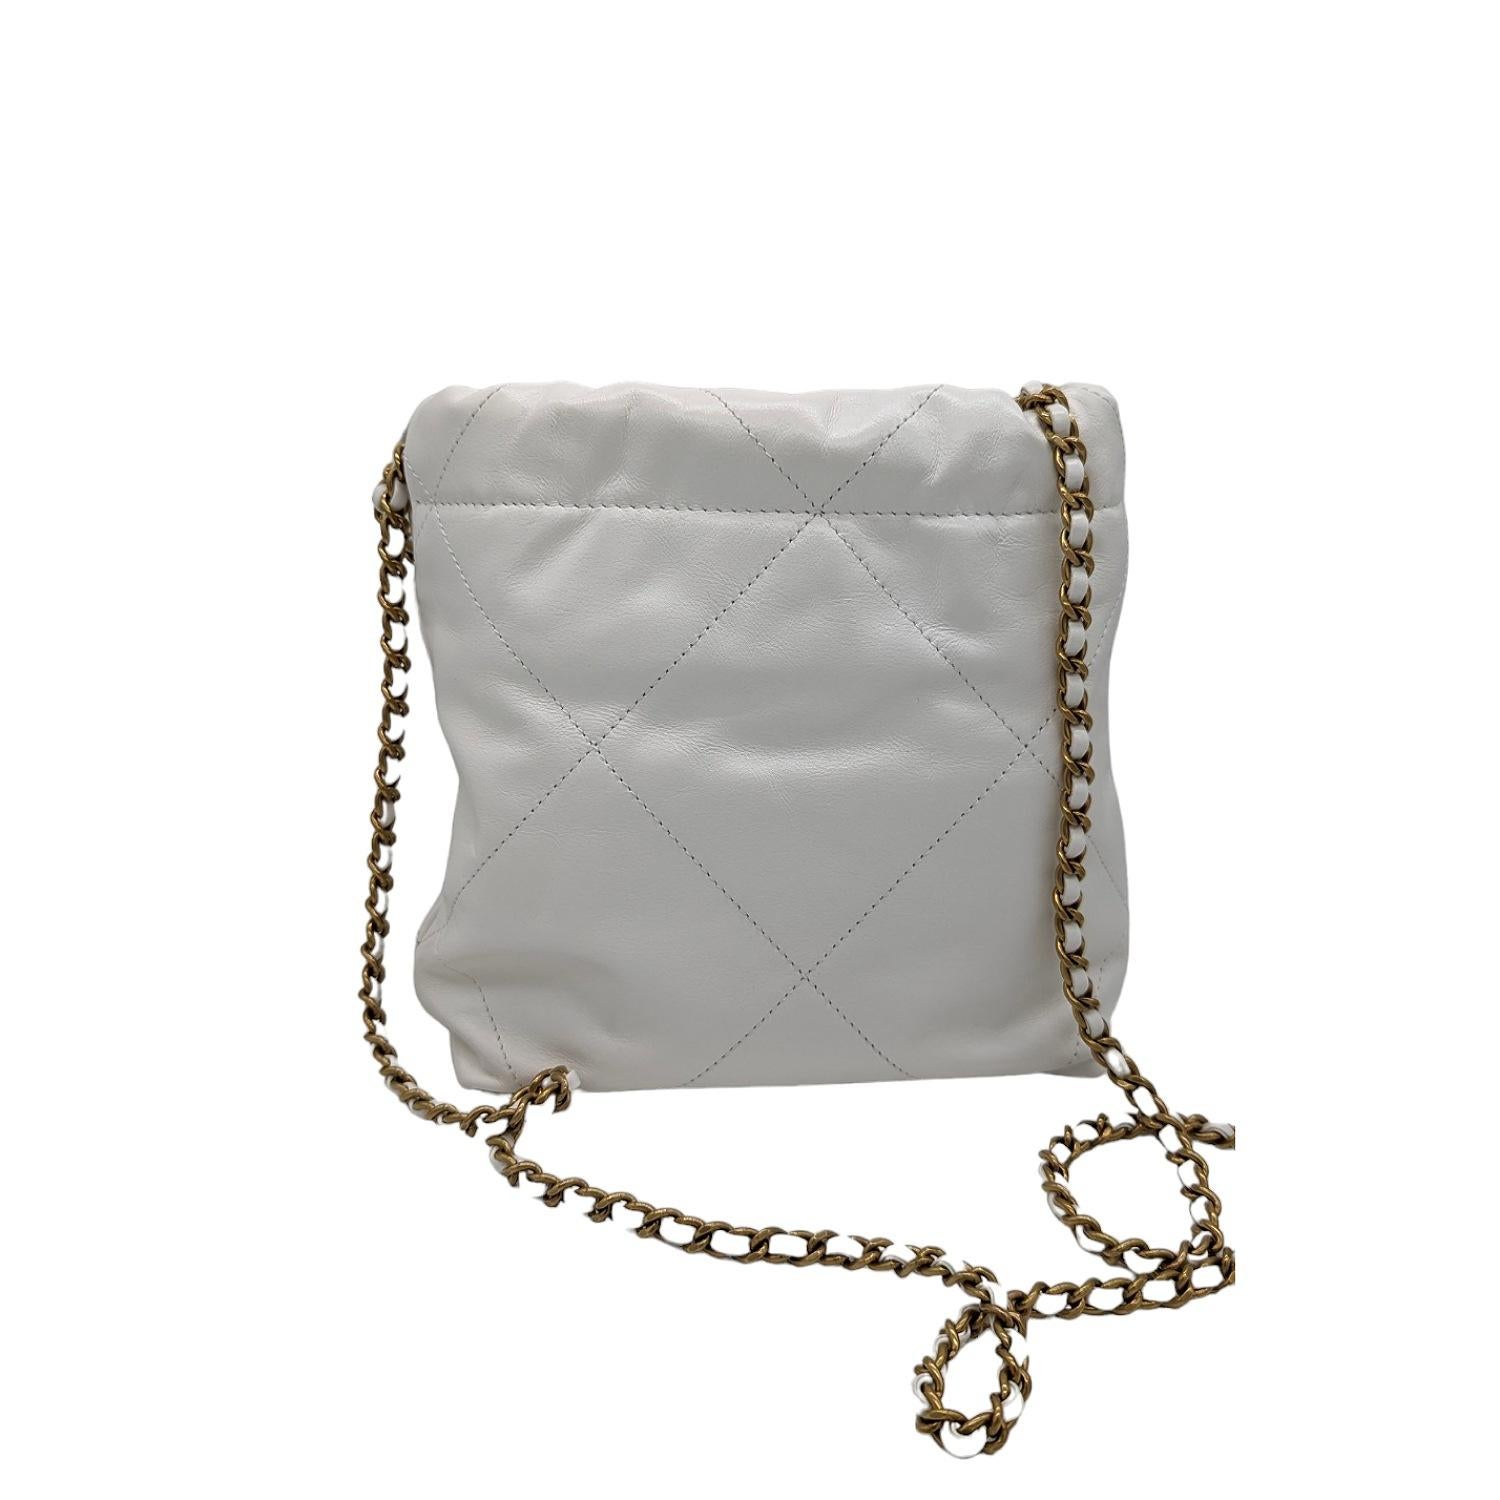 This chic bag is crafted with smooth calfskin diamond-stitched leather in white. The bag features a leather threaded aged gold chain link shoulder strap joined to a thin rolled leather strap, a leather threaded chain link handle, an aged gold